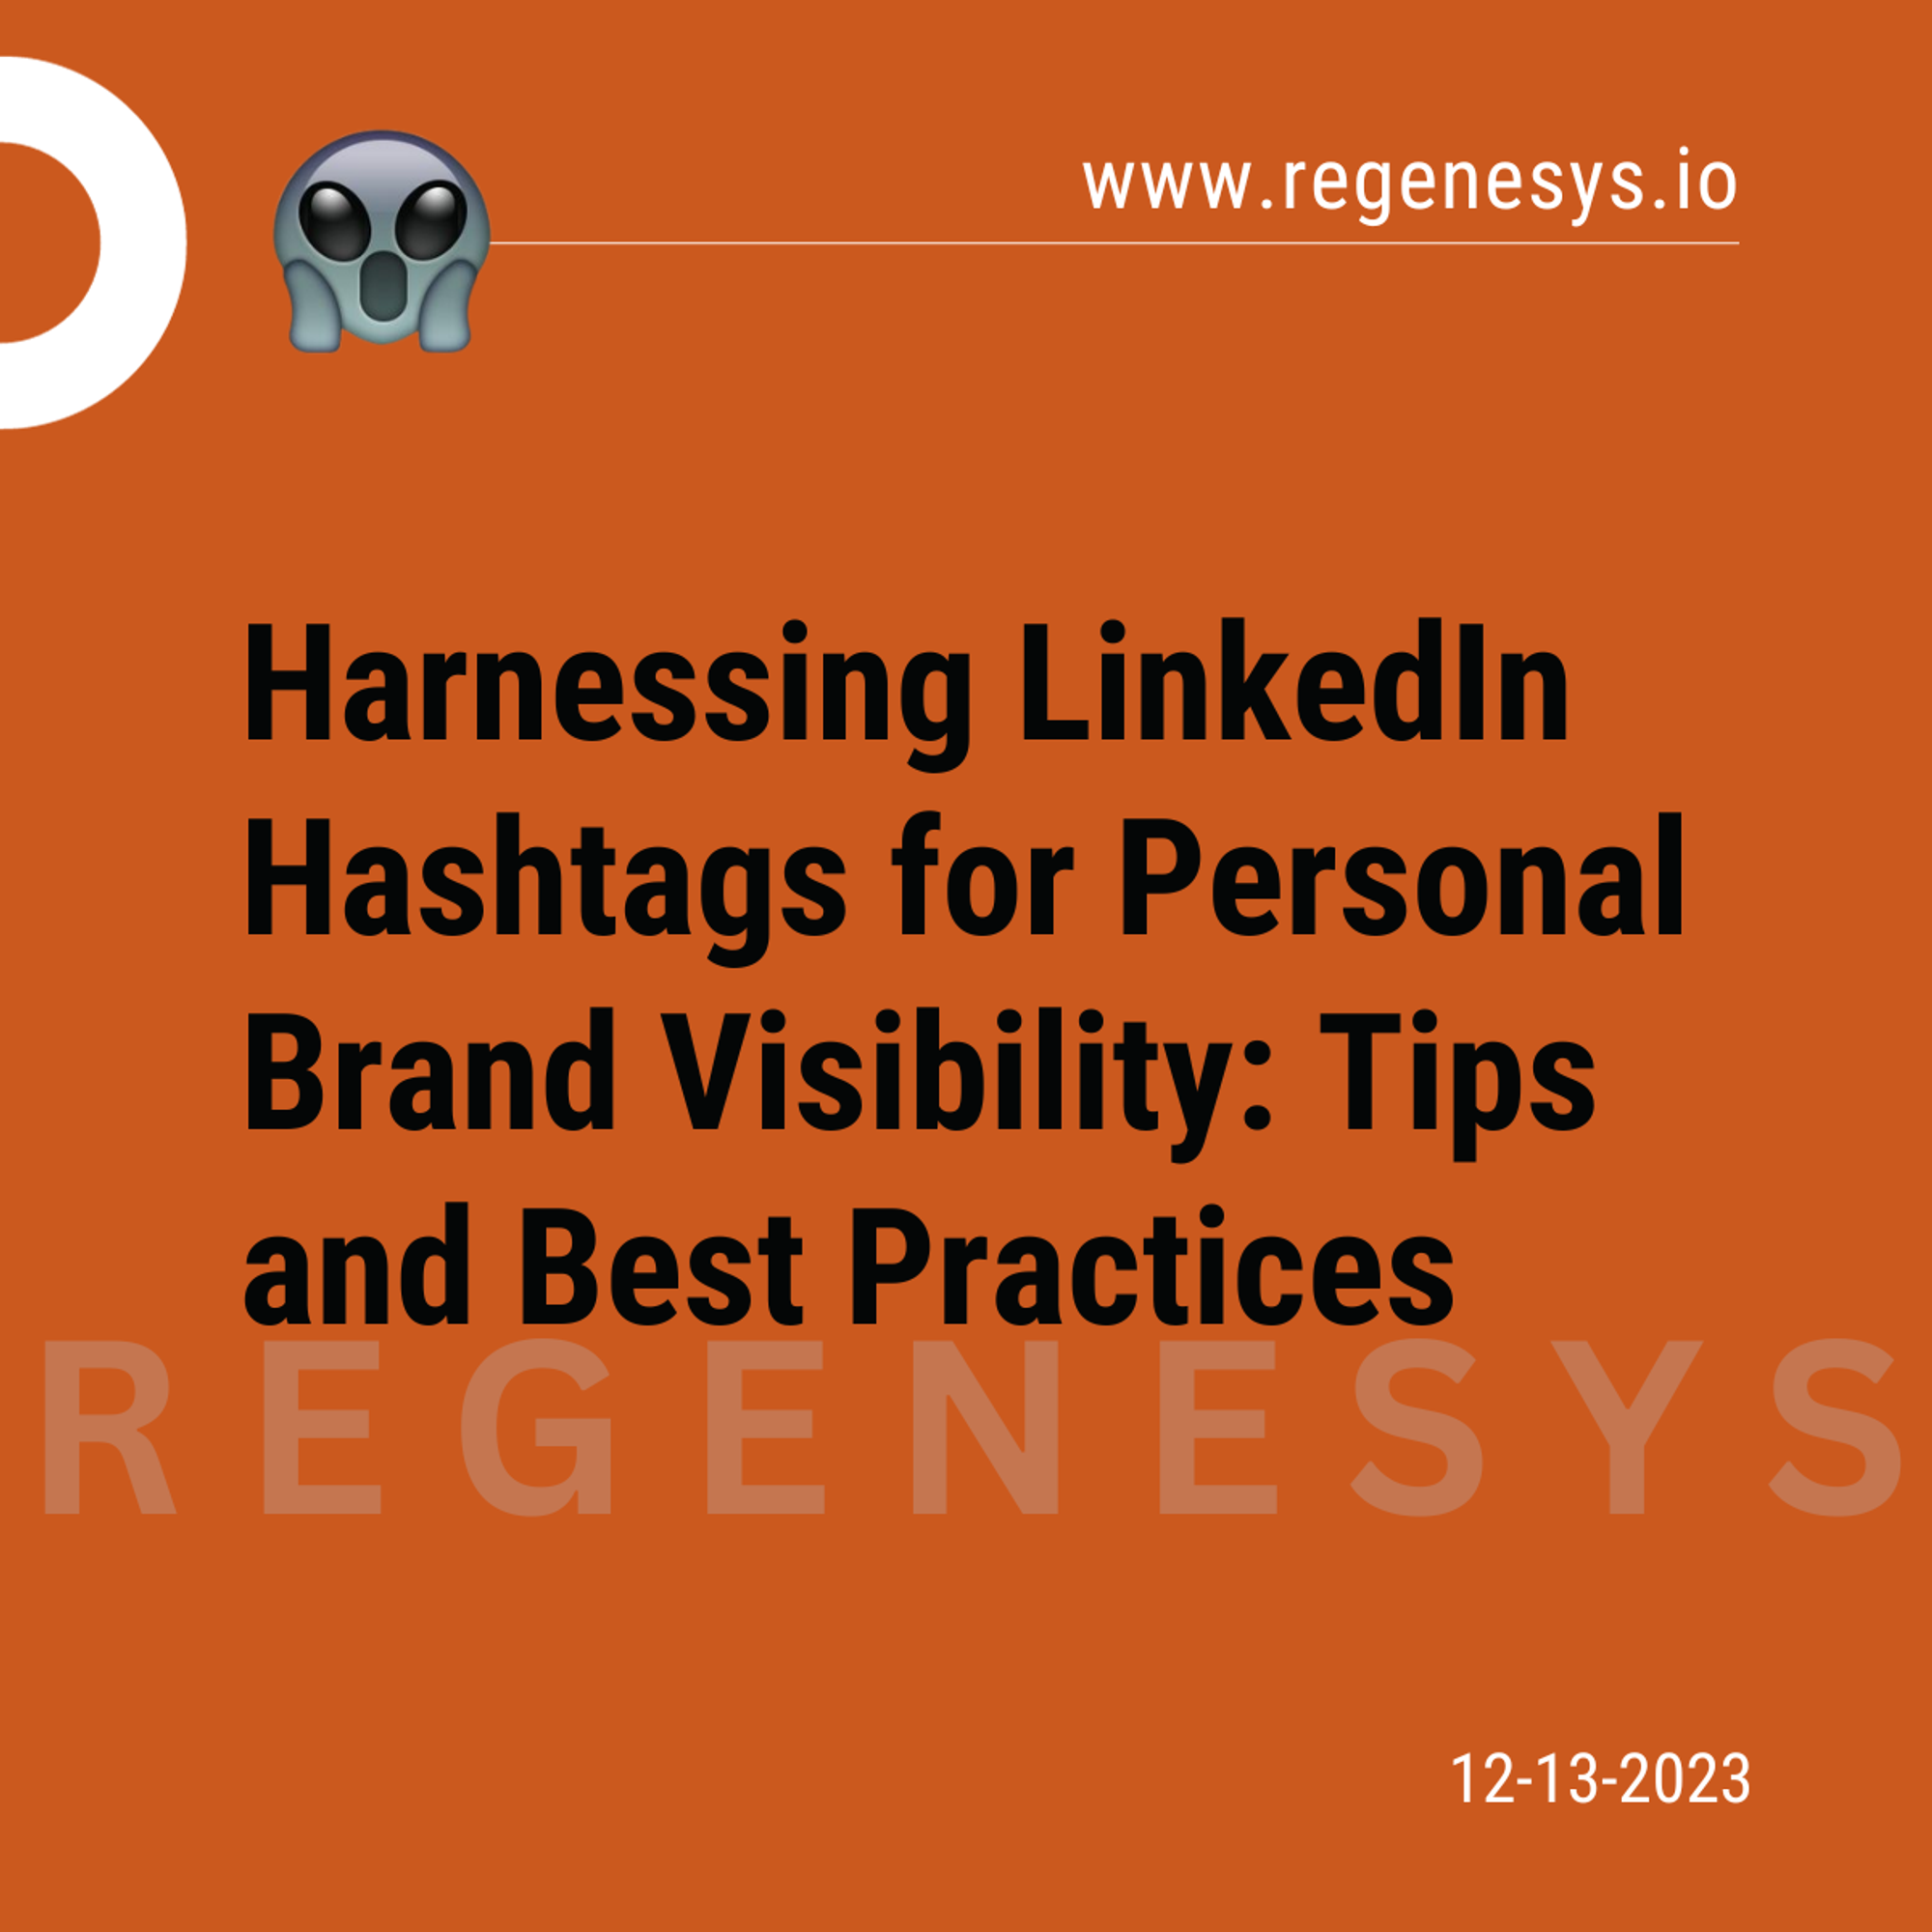 Harnessing LinkedIn Hashtags for Personal Brand Visibility